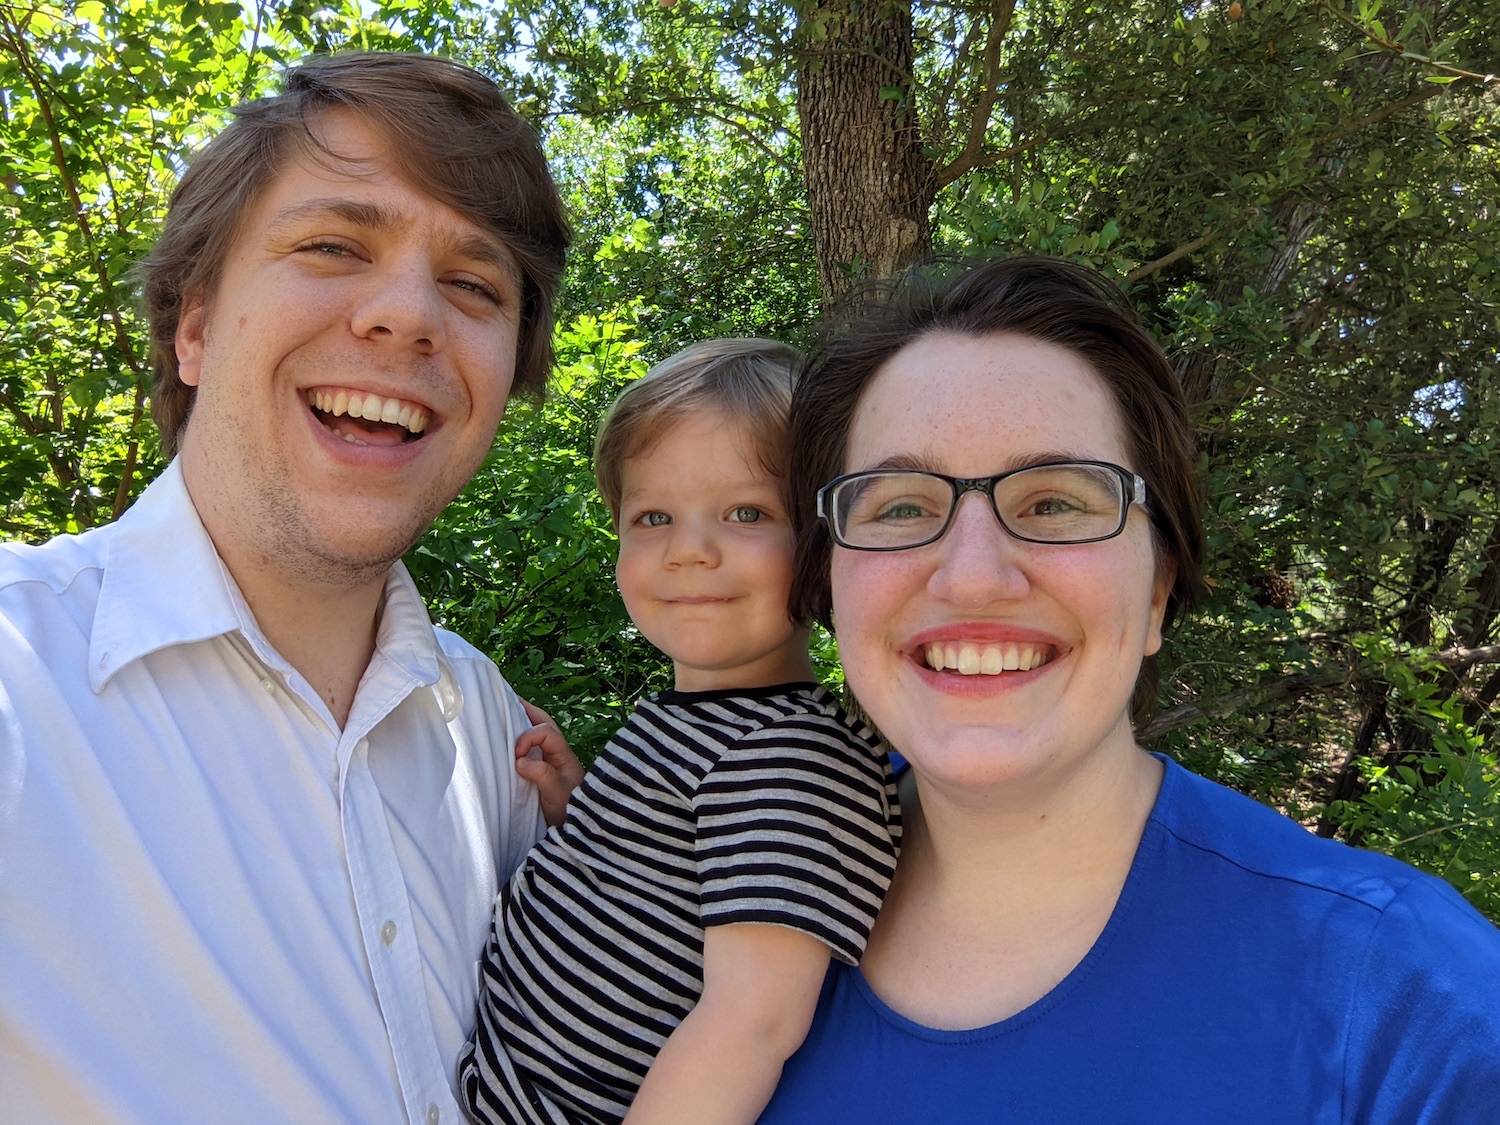 Ian and Amelia Henriksen with their one-year-old son, Vincent.